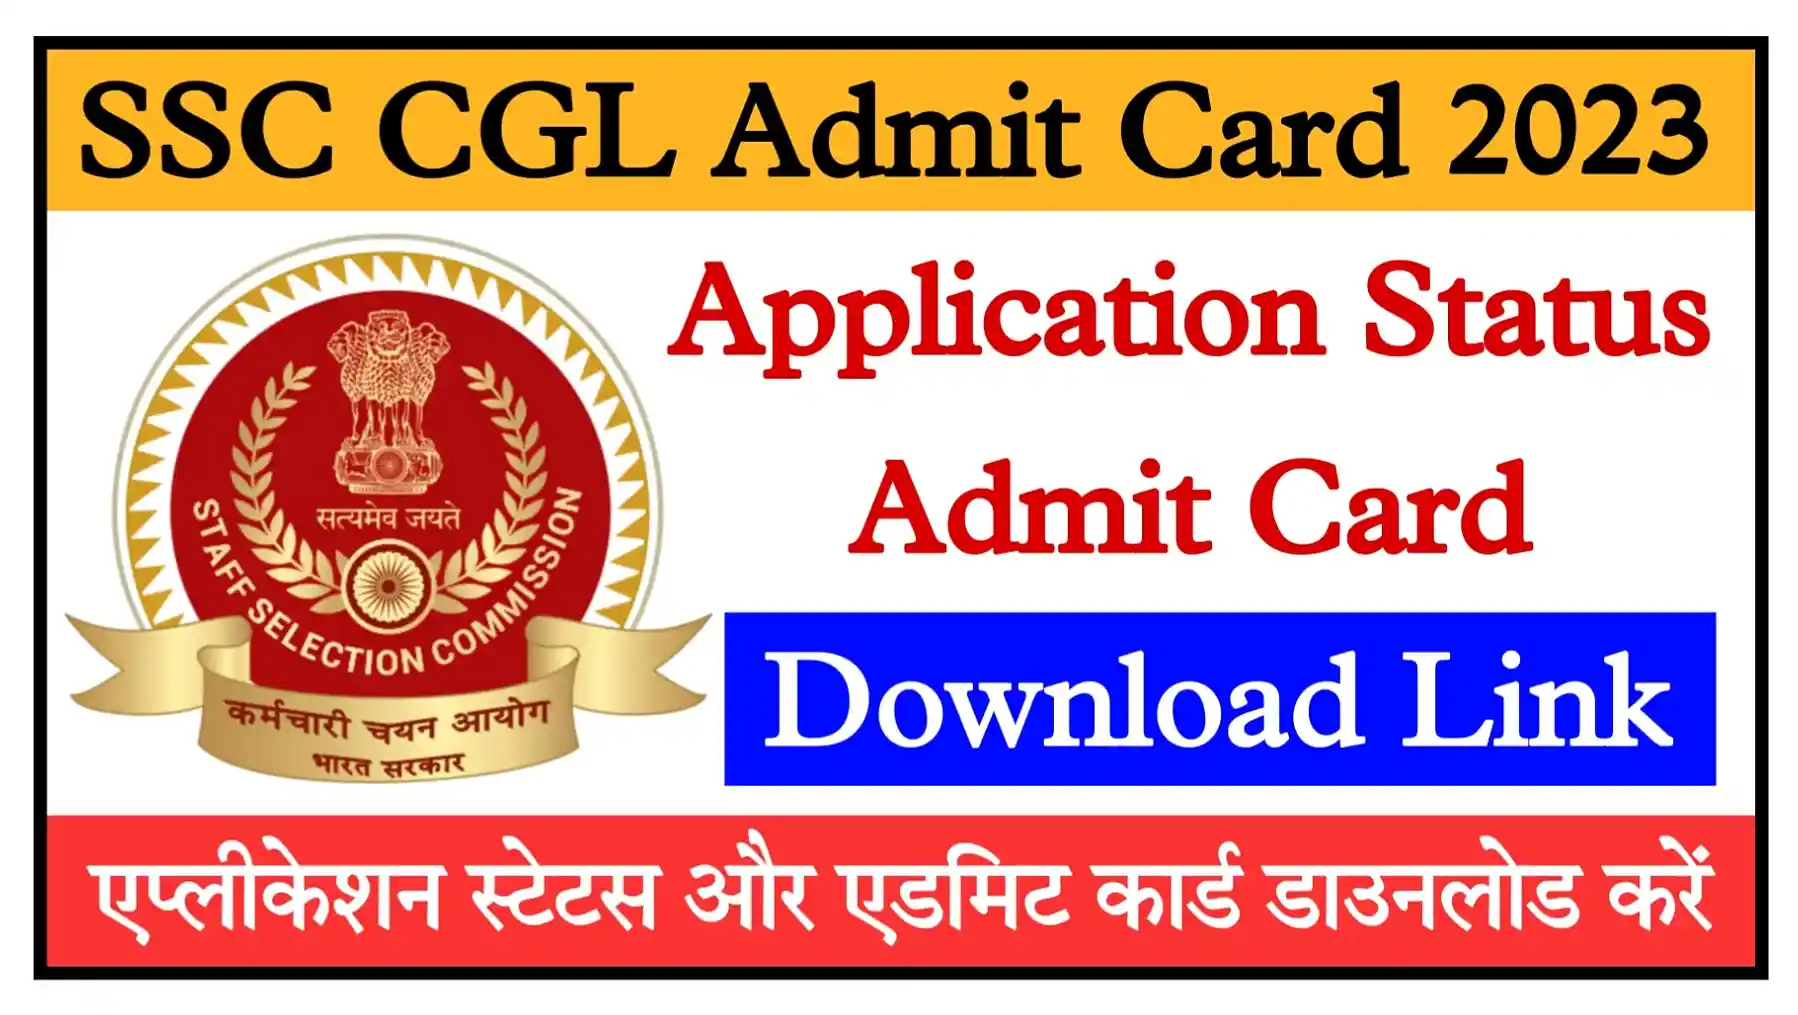 SSC CGL Admit Card 2023 Direct Link SSC CGL Admit Card And Application Download Link @ssc.nic.in